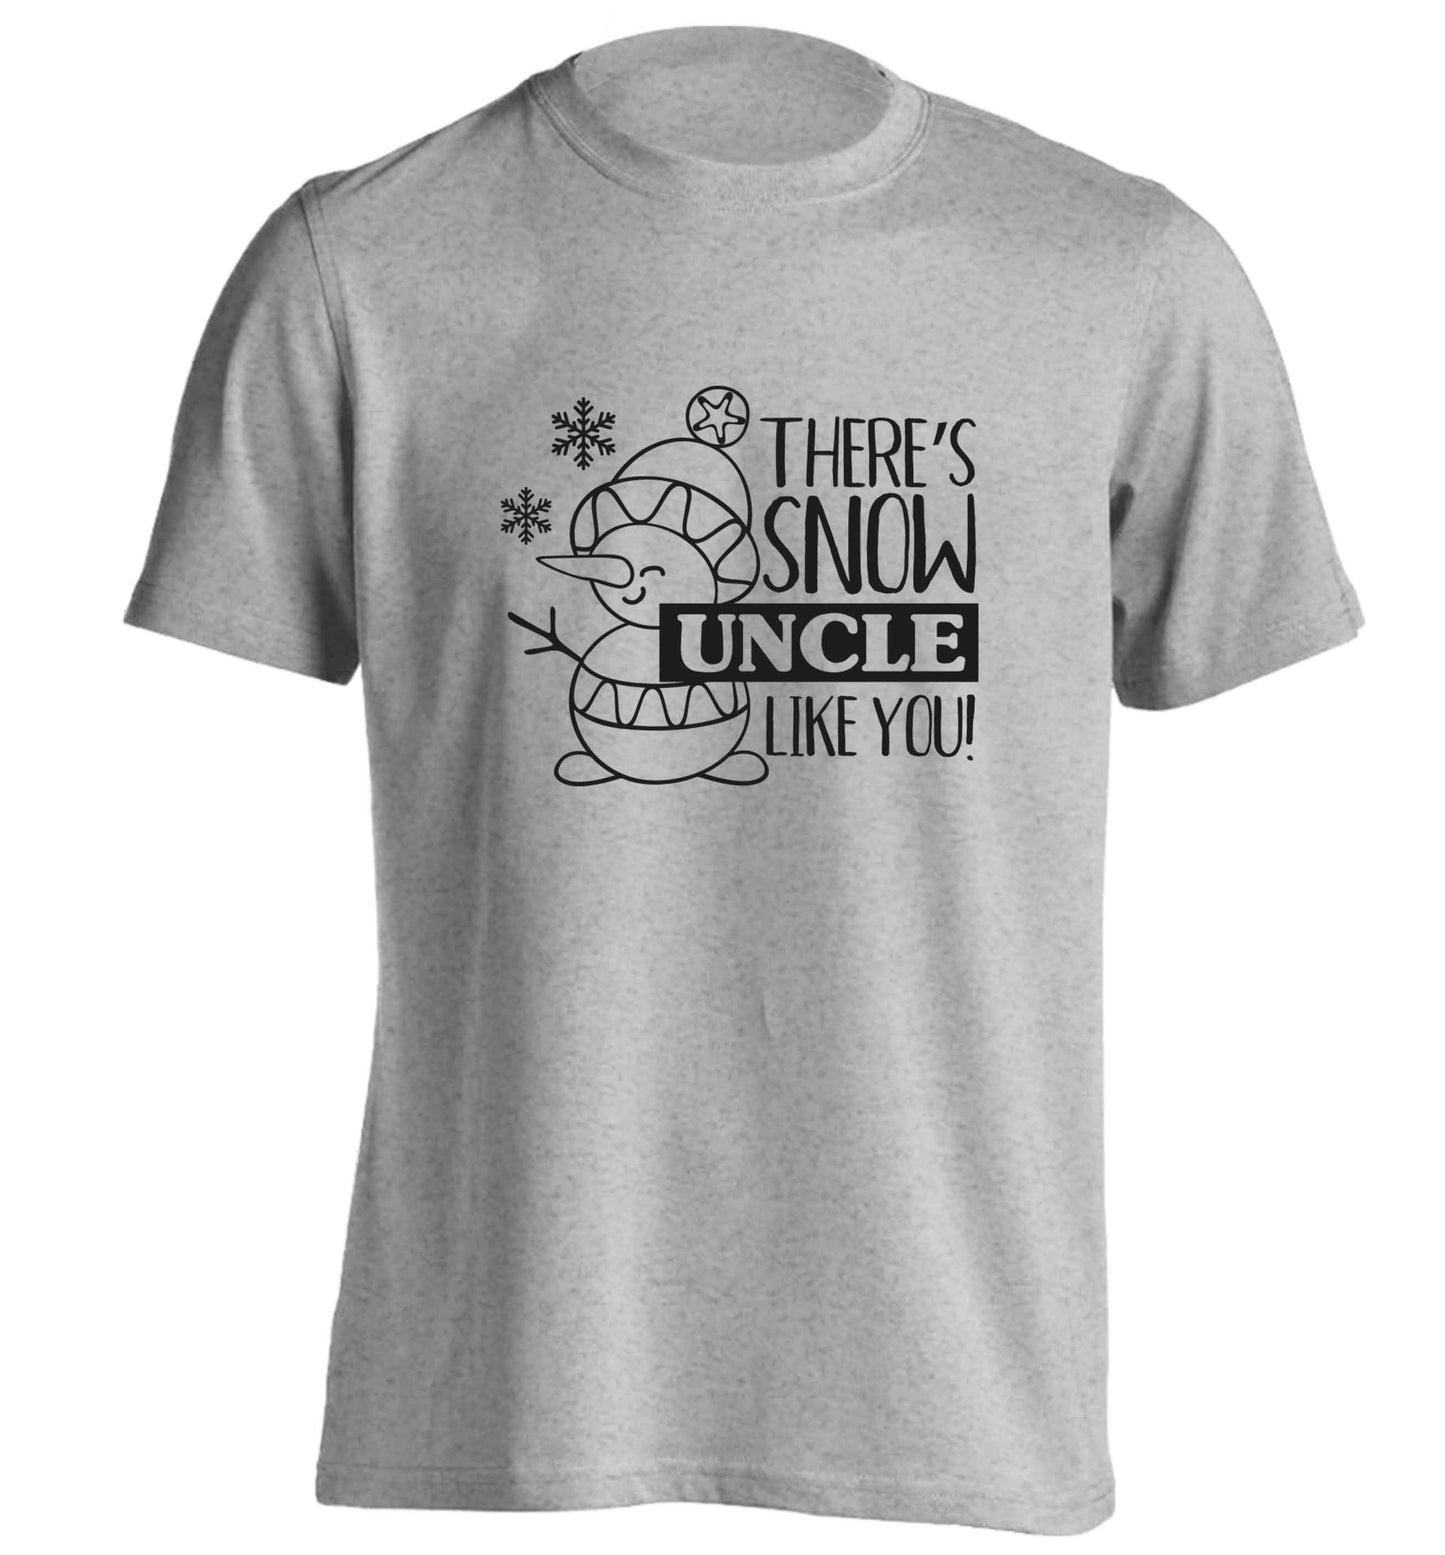 There's snow uncle like you adults unisex grey Tshirt 2XL